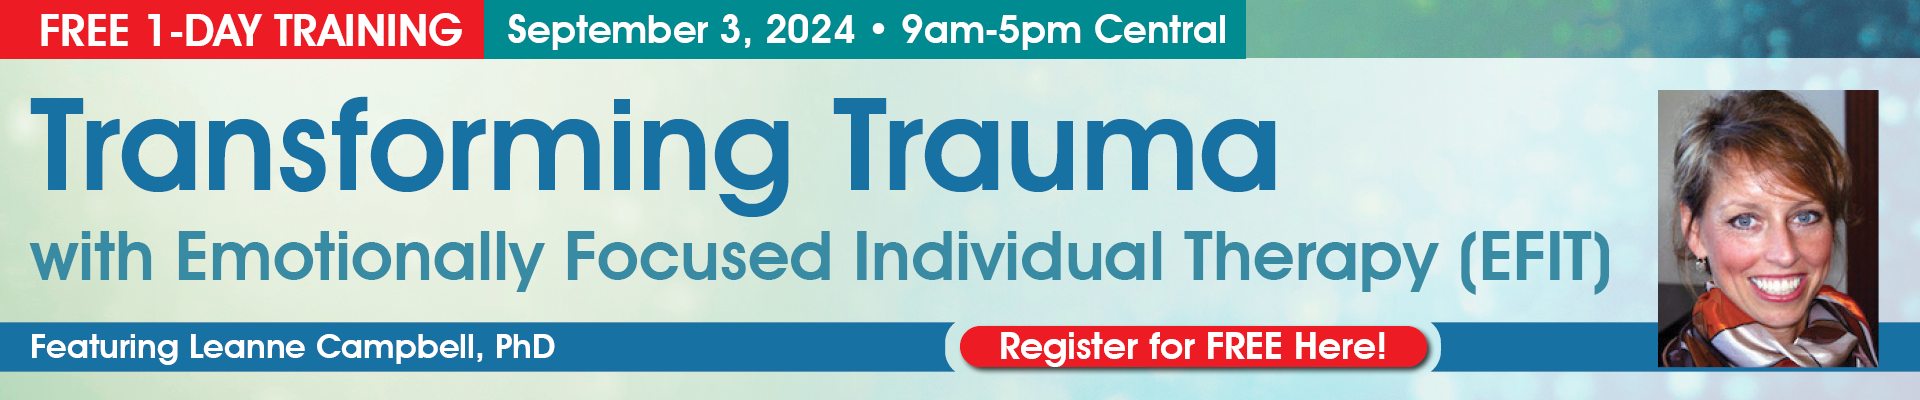 Transforming Trauma with Emotionally Focused Individual Therapy (EFIT)